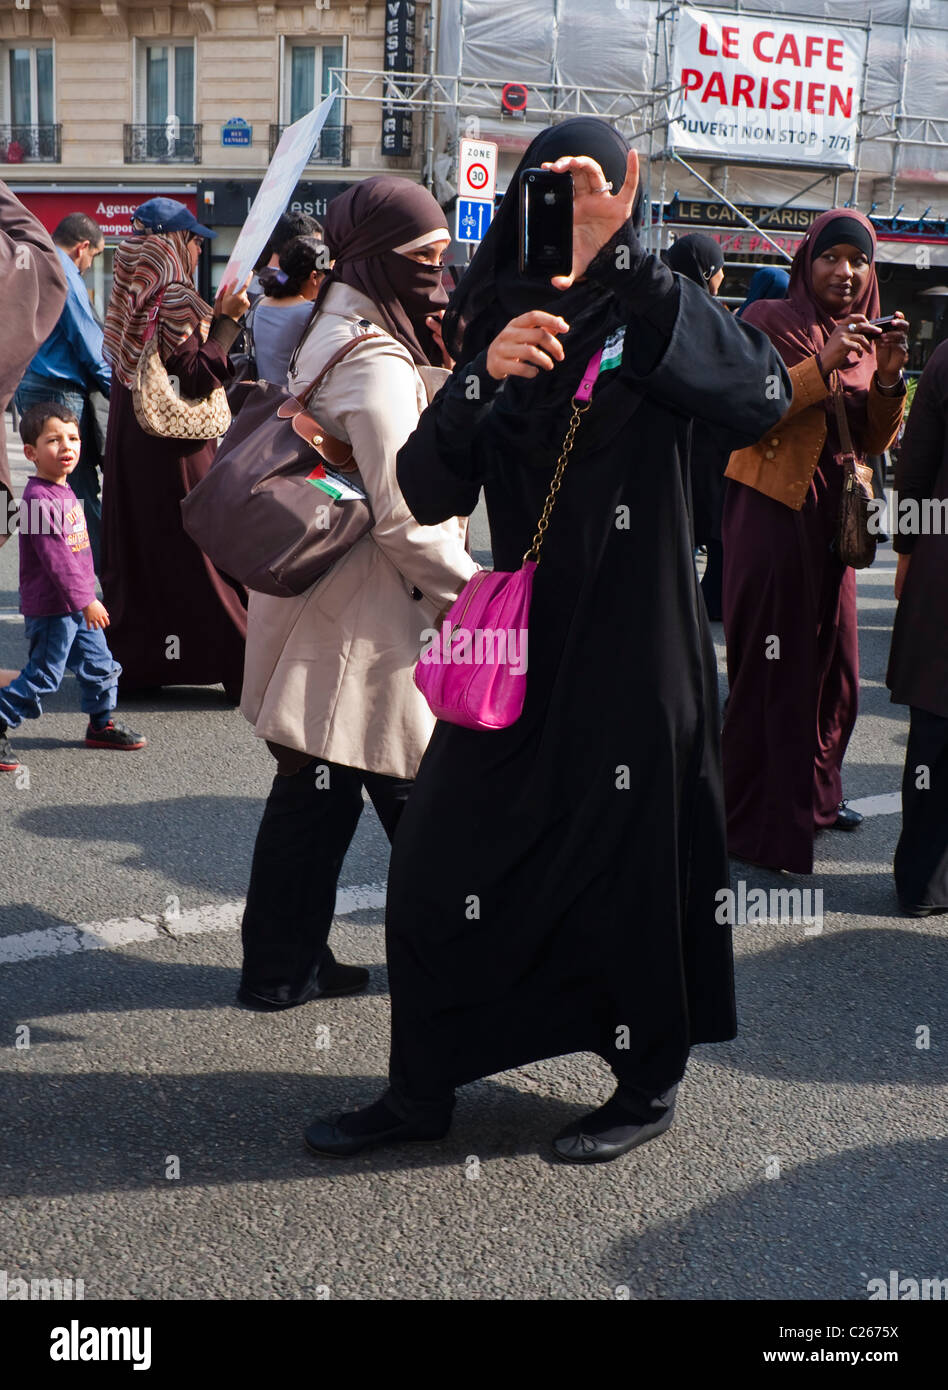 Paris, France, Muslim Women Demonstrating Against Islamophobie, Taking Pictures with I-Phone in headscarf, Hijab, woman in hajib Stock Photo